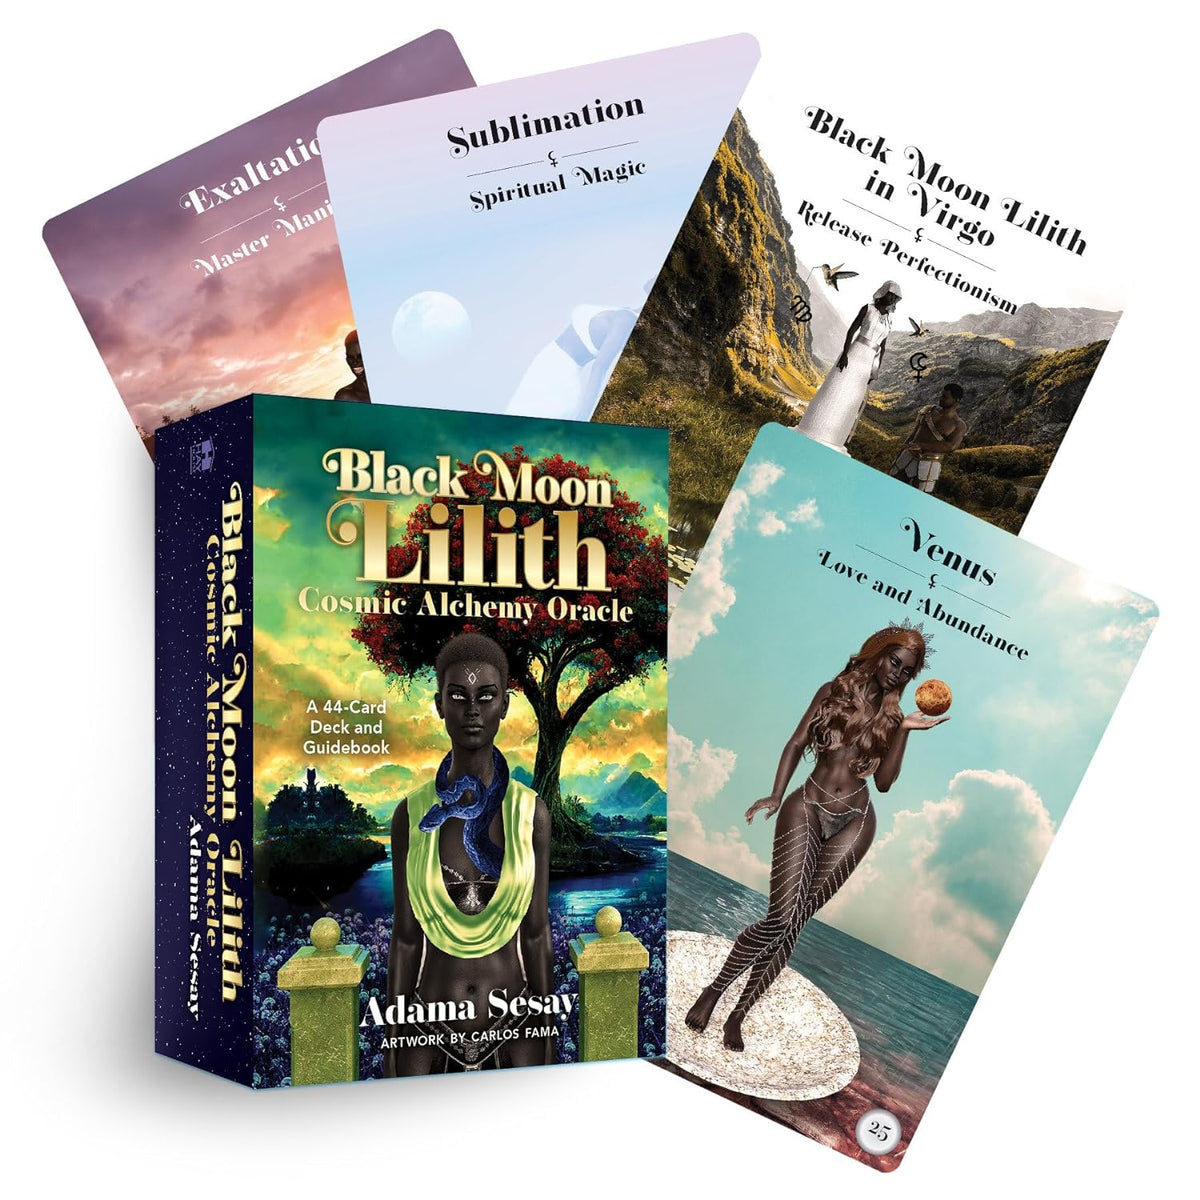 Black Moon Lilith Cosmic Alchemy Oracle: A 44-Card Deck and Guidebook